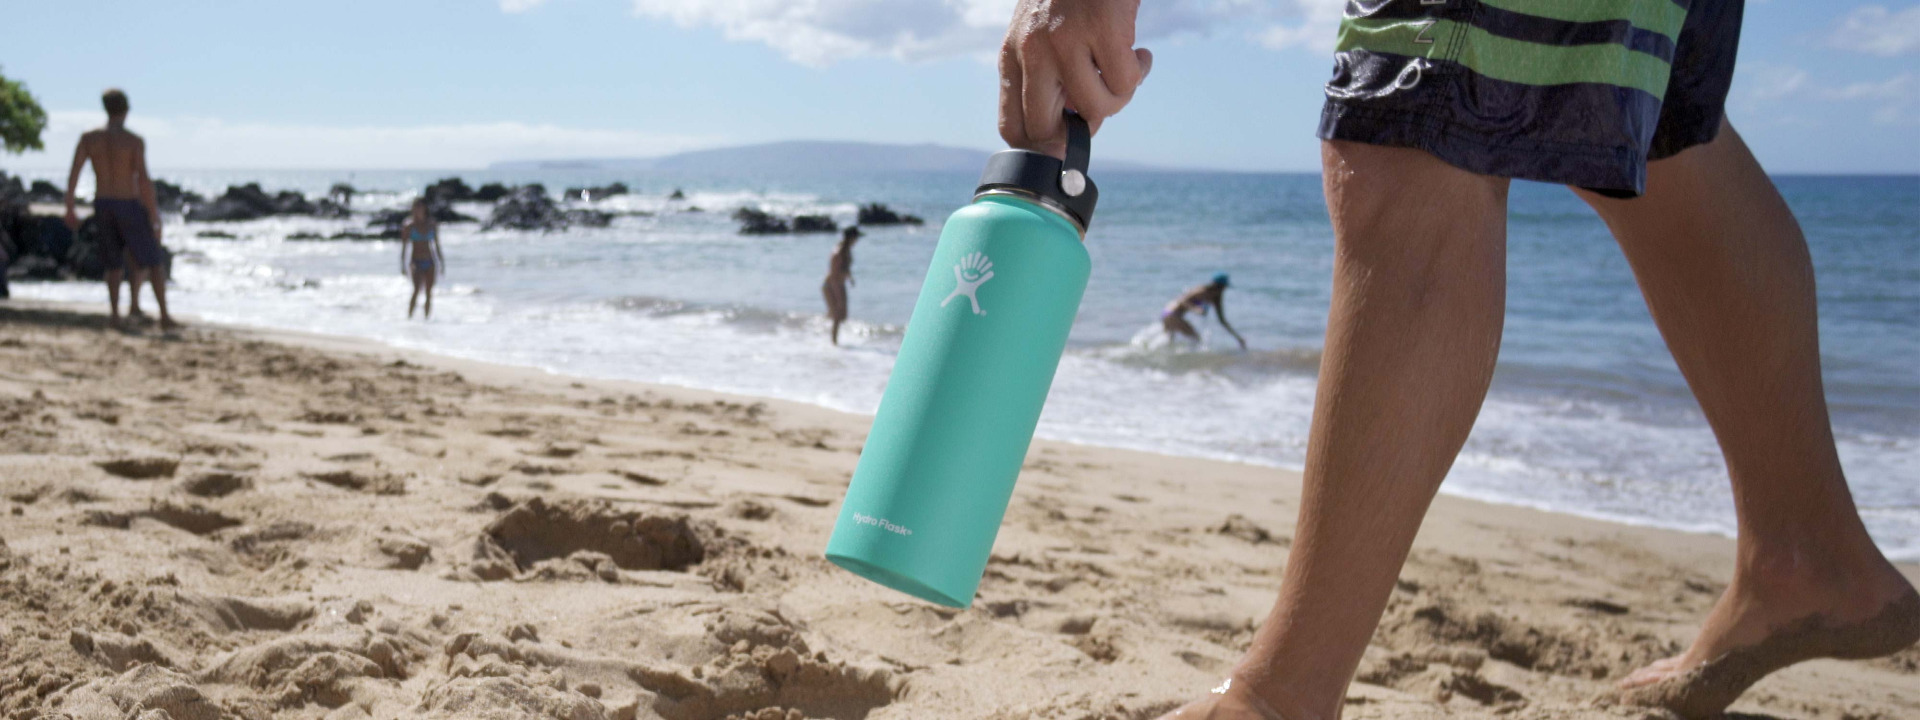 man carrying hydroflask on the beach